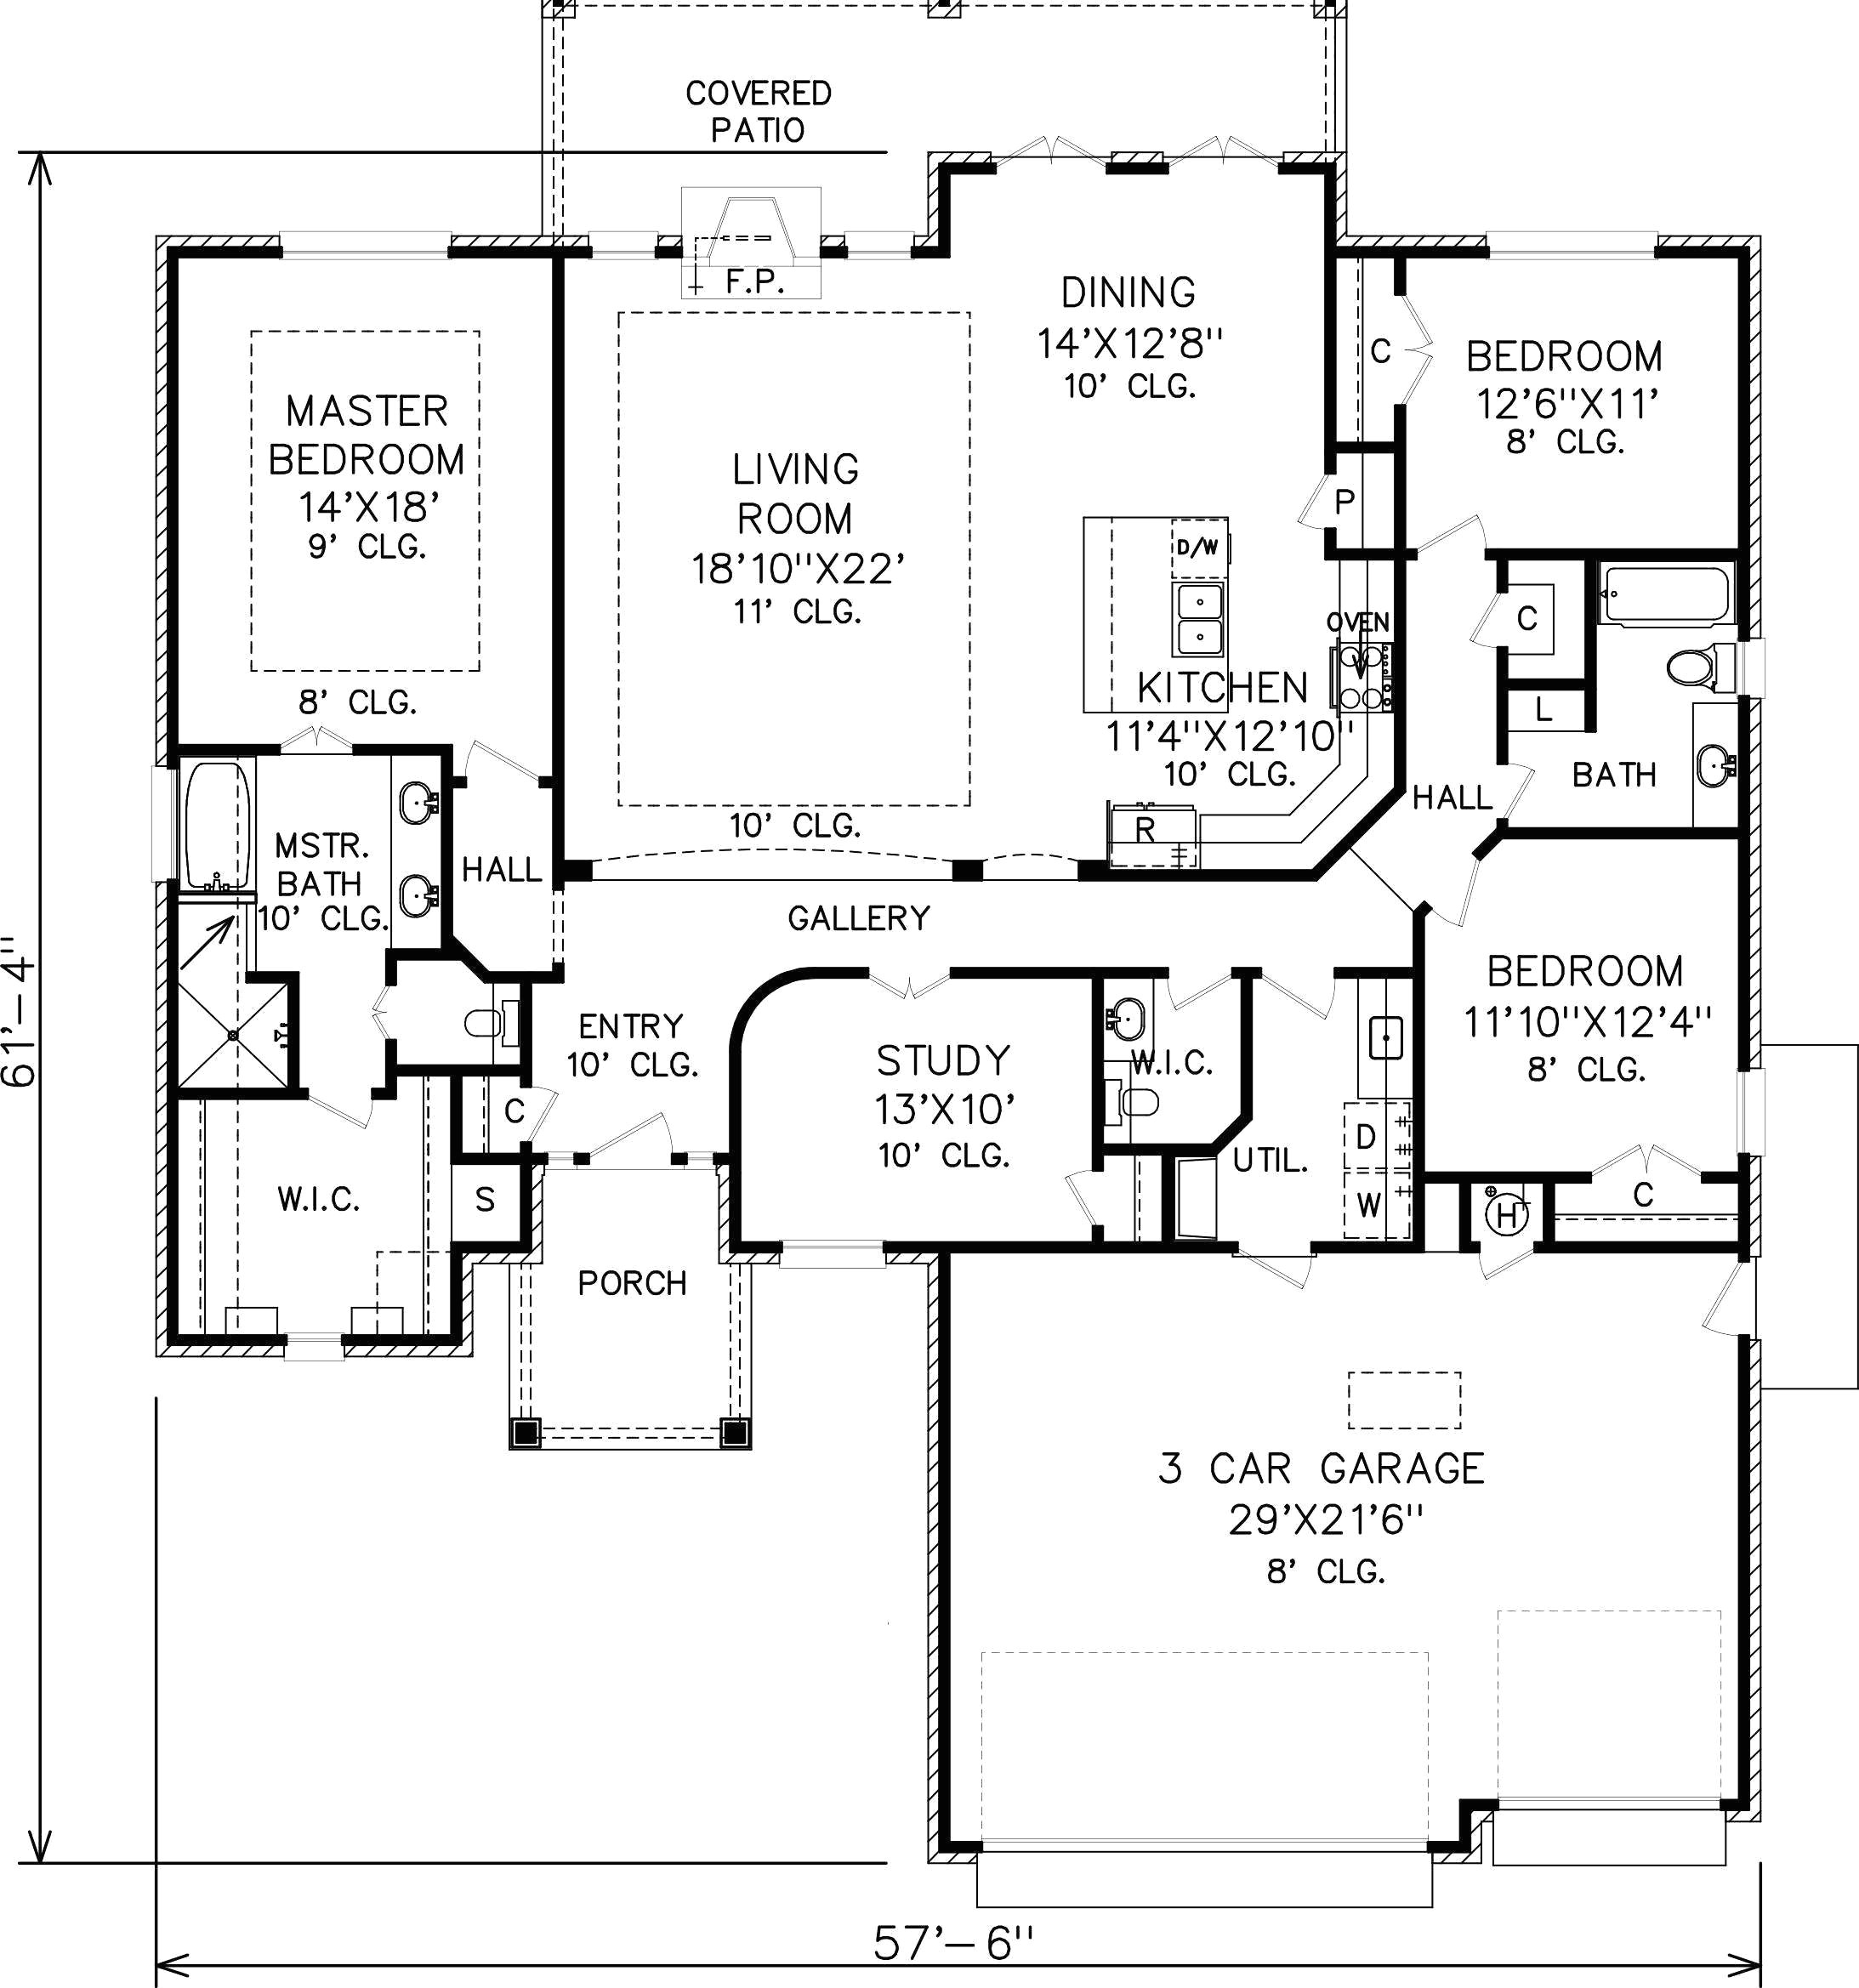 Drawing 3 6 Draw 39 Fresh How to Draw A Floor Plan Layout Floor Plan Design